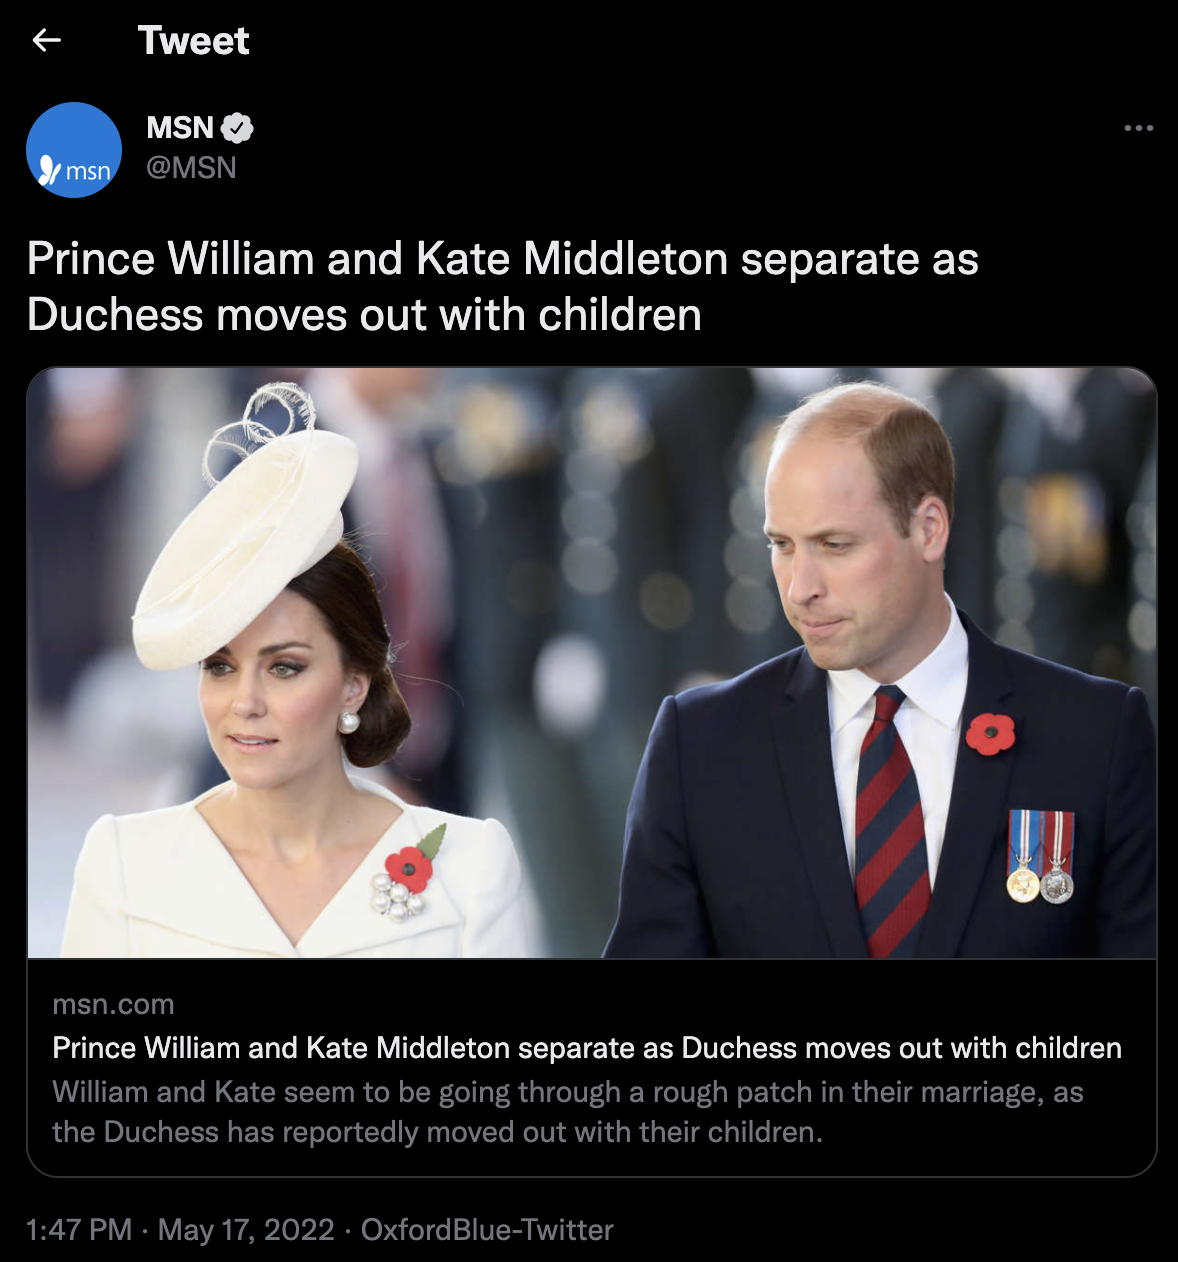 A Kate Middleton and Prince William Breakup Article Went Viral. Here’s the Truth About the Rumors